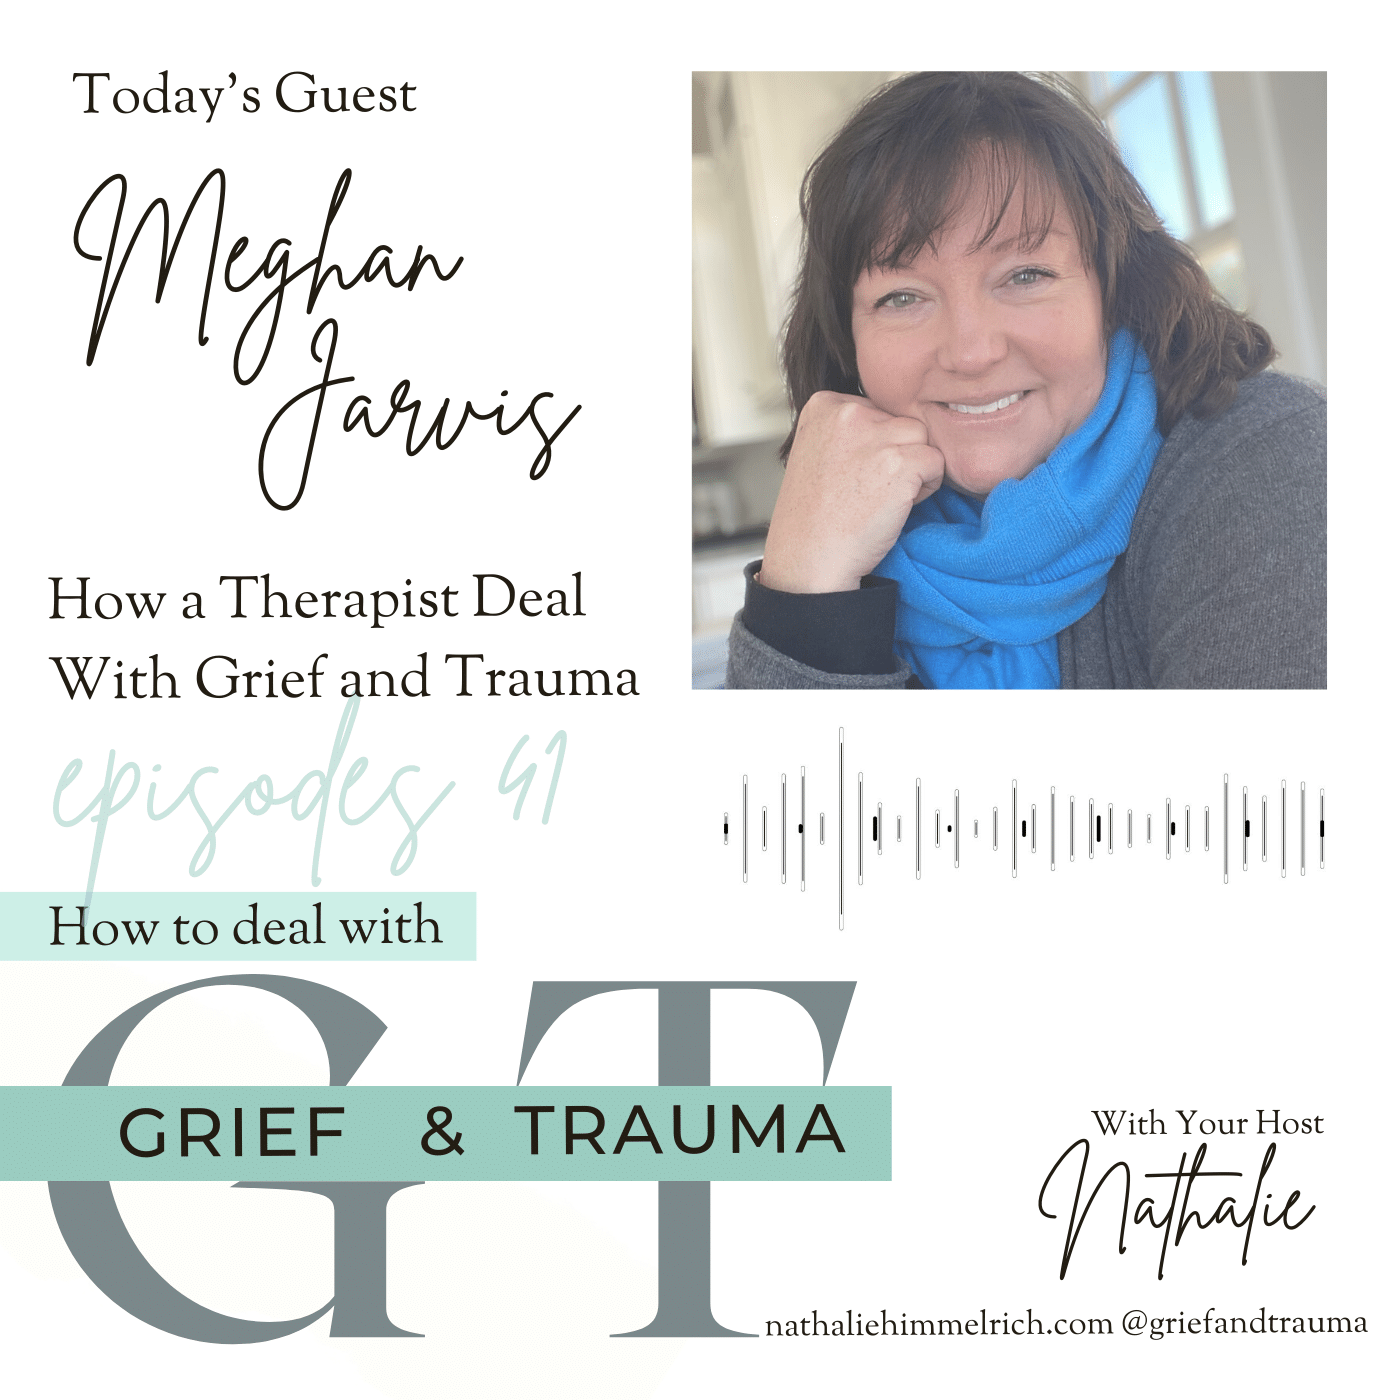 Meghan Jarvis on How a Therapist Deal With Grief and Trauma | Episode 41